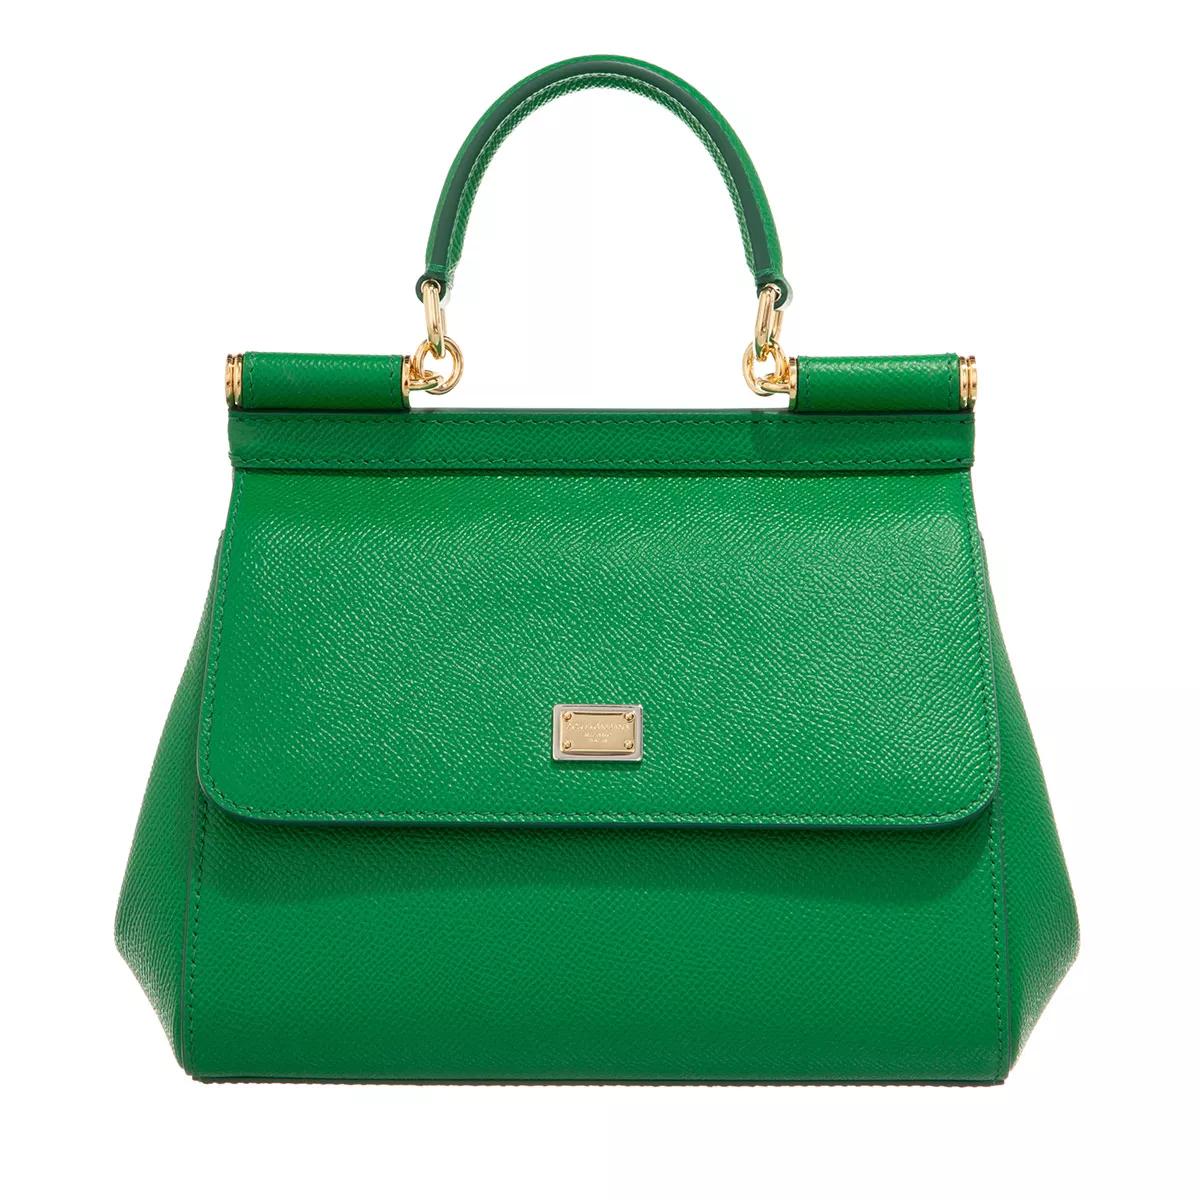 Dolce&Gabbana Small Sicily Bag Dauphine Leather Green, Satchel